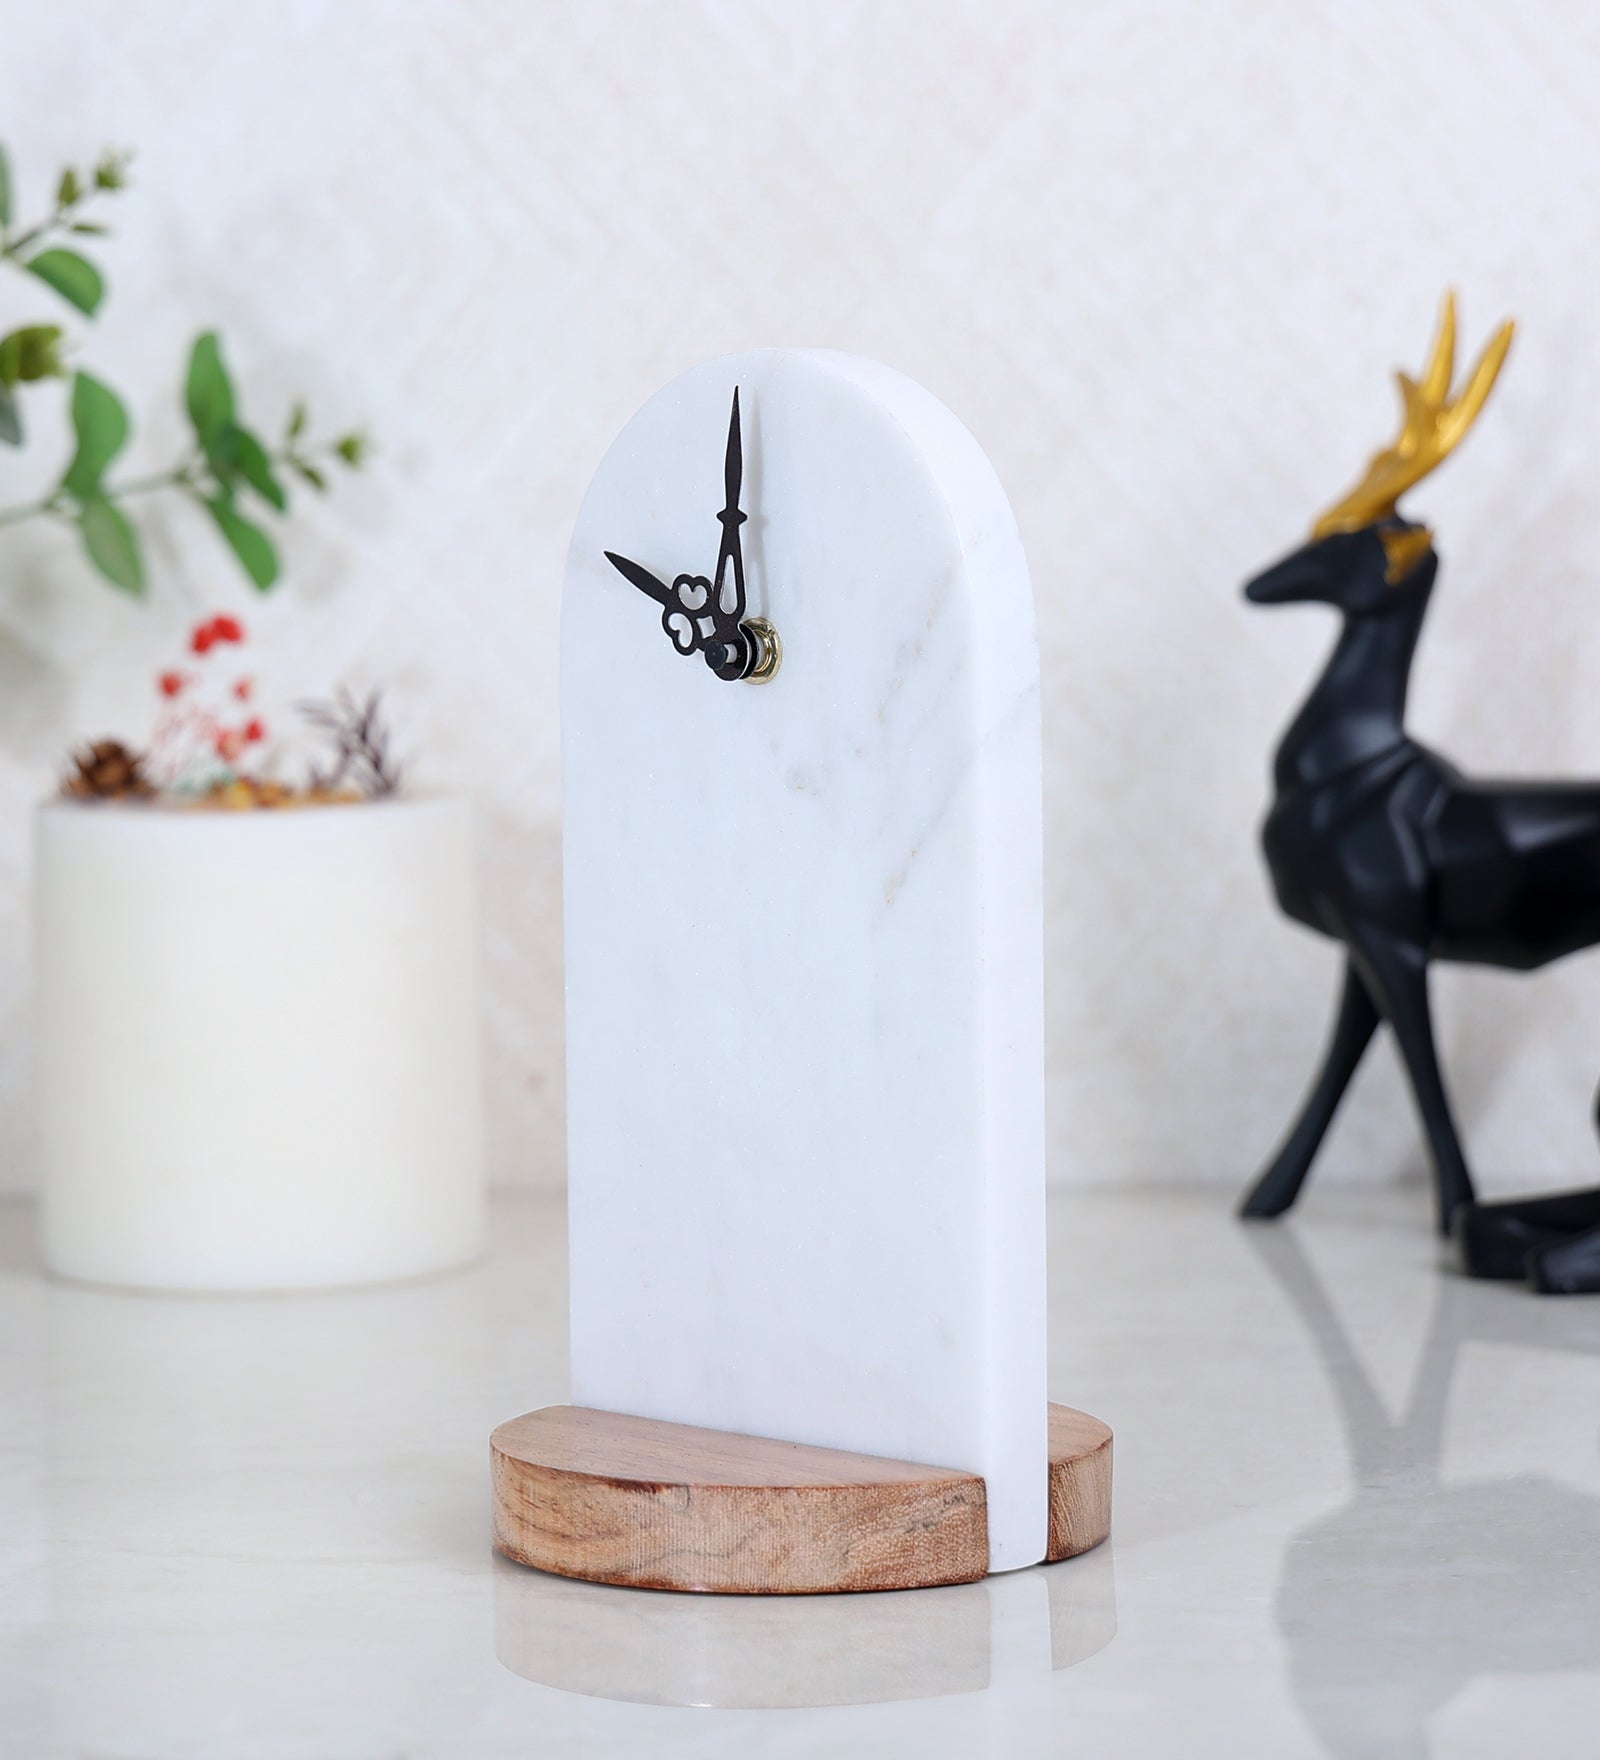 Marble and Wood Table Clock